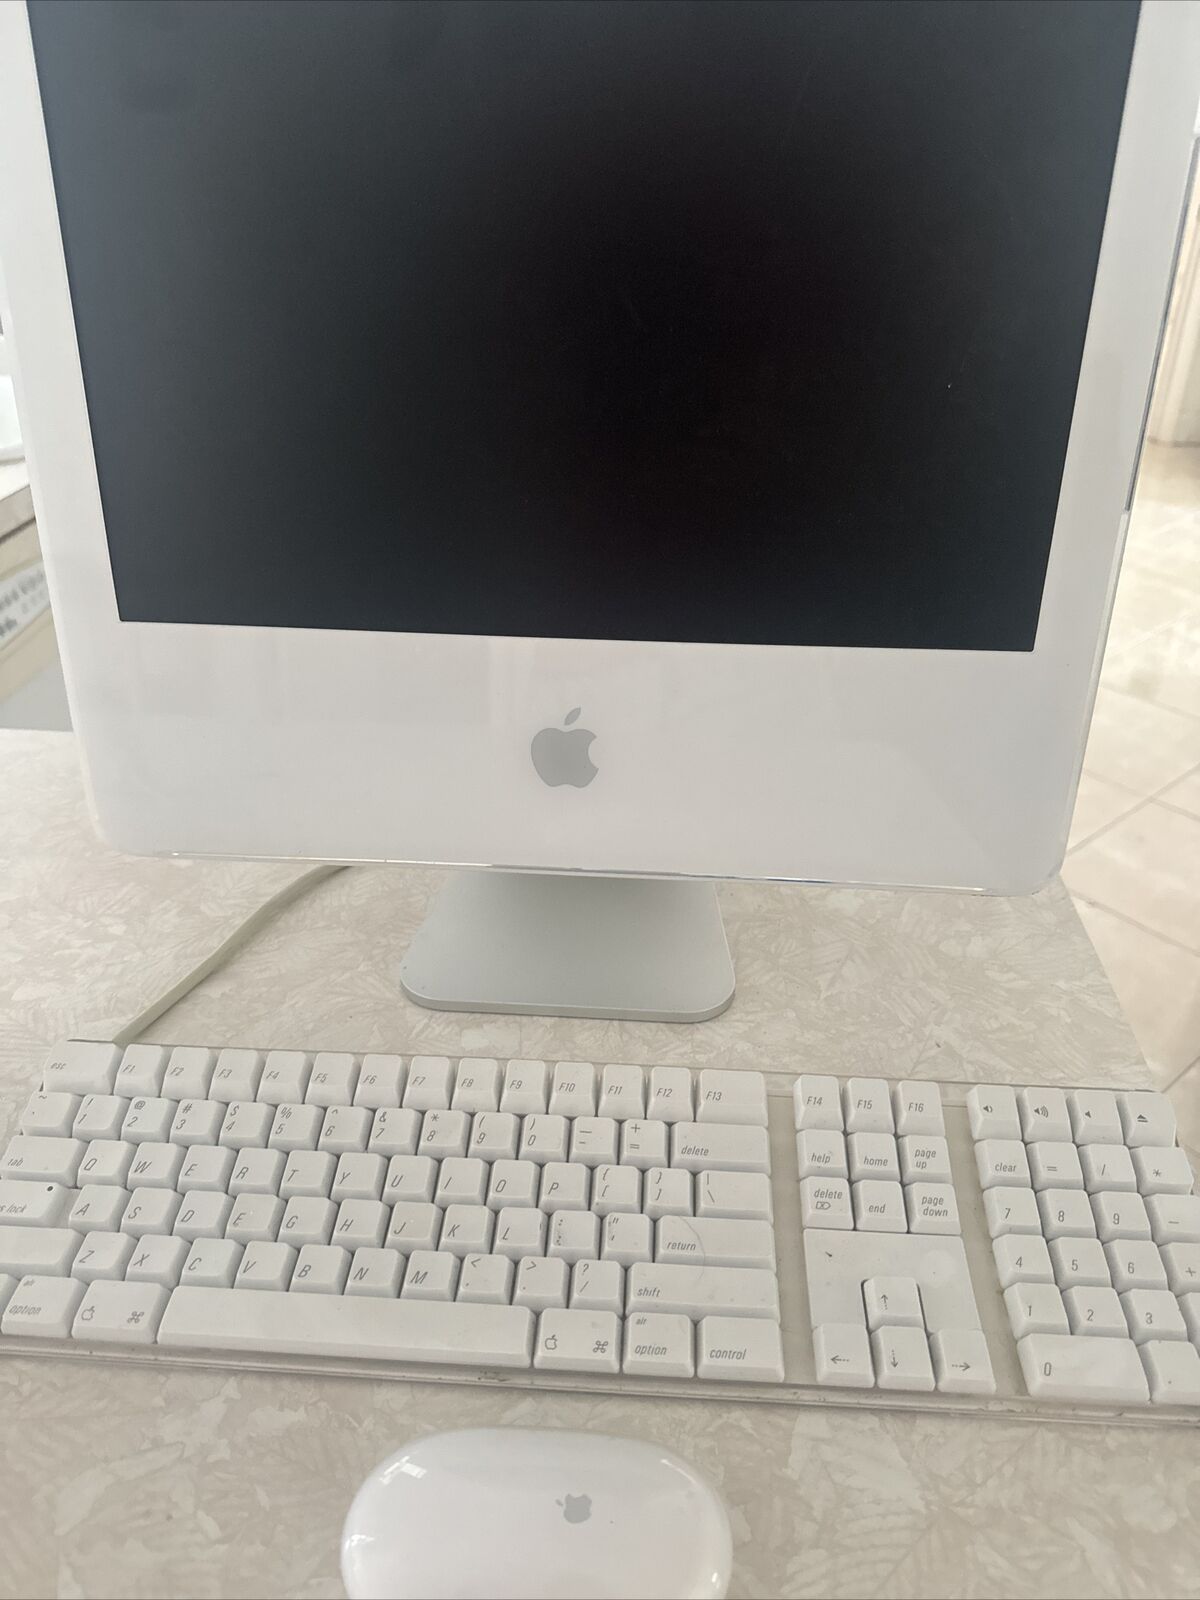 Apple iMac 17 Inch 2005 With Keyboard And Wireless Mouse Screen Lines But Works